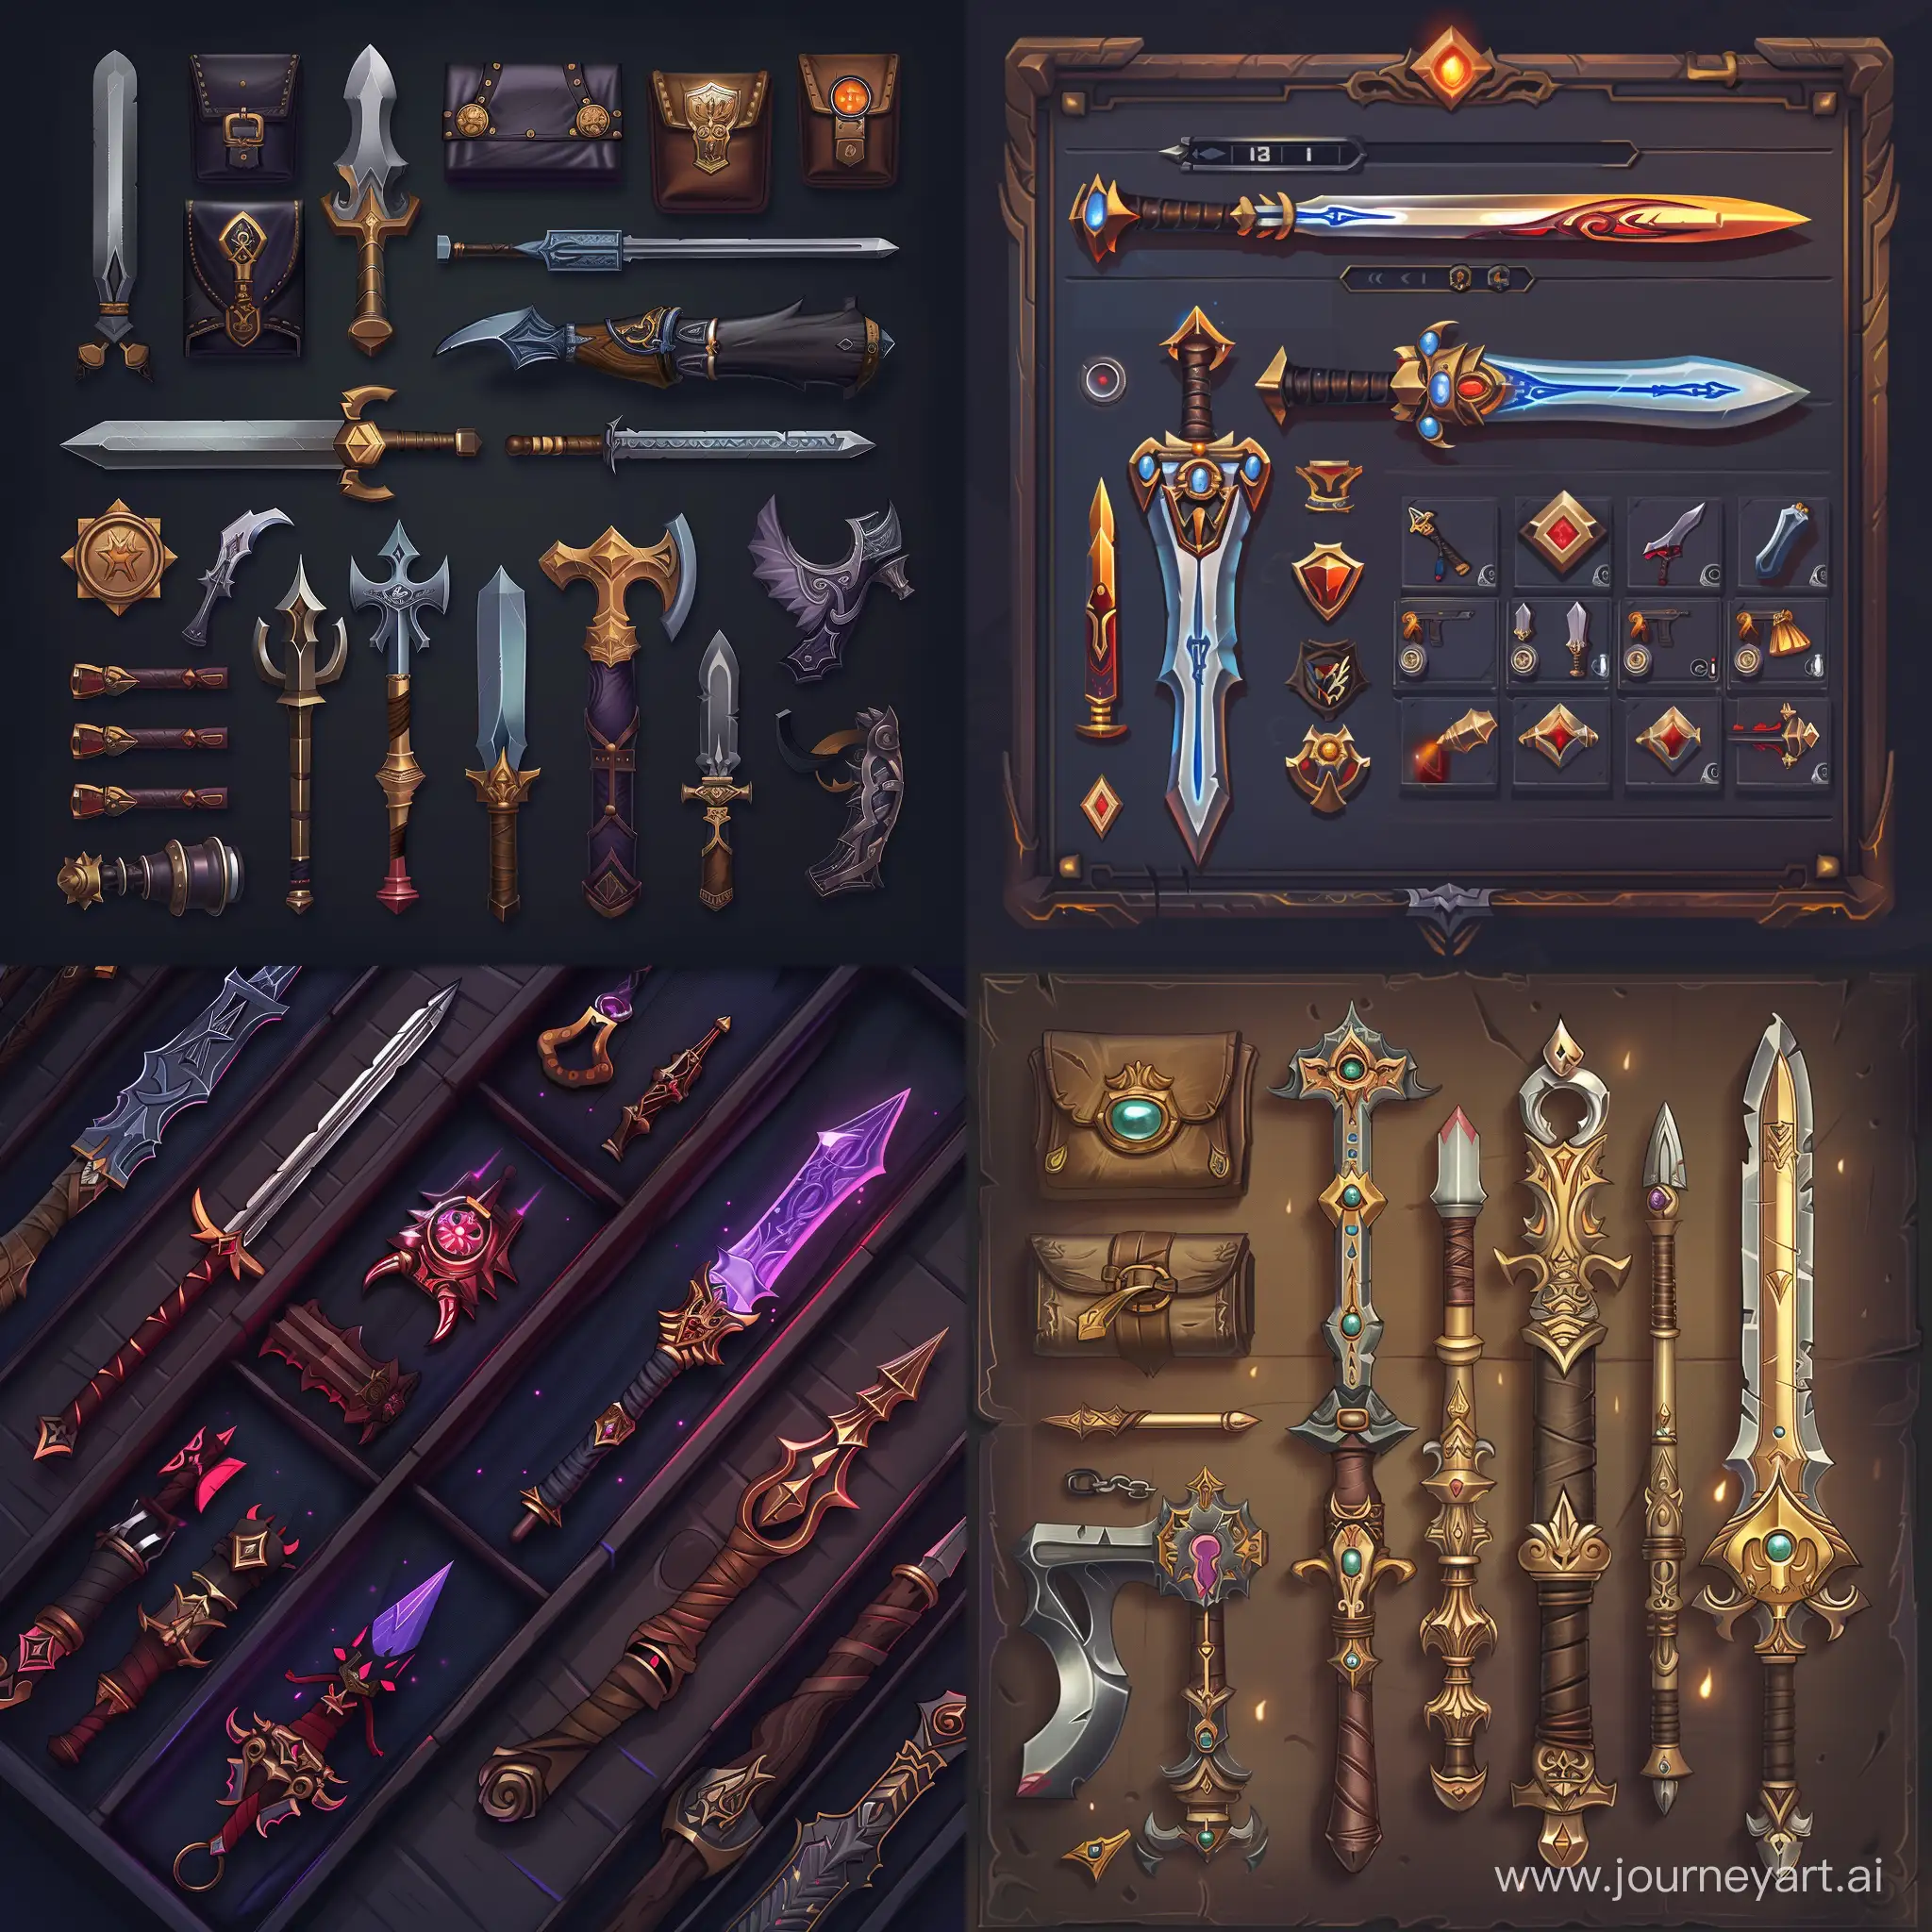 Stylized-2D-Mobile-RPG-Inventory-UI-with-Warcraft-Weapons